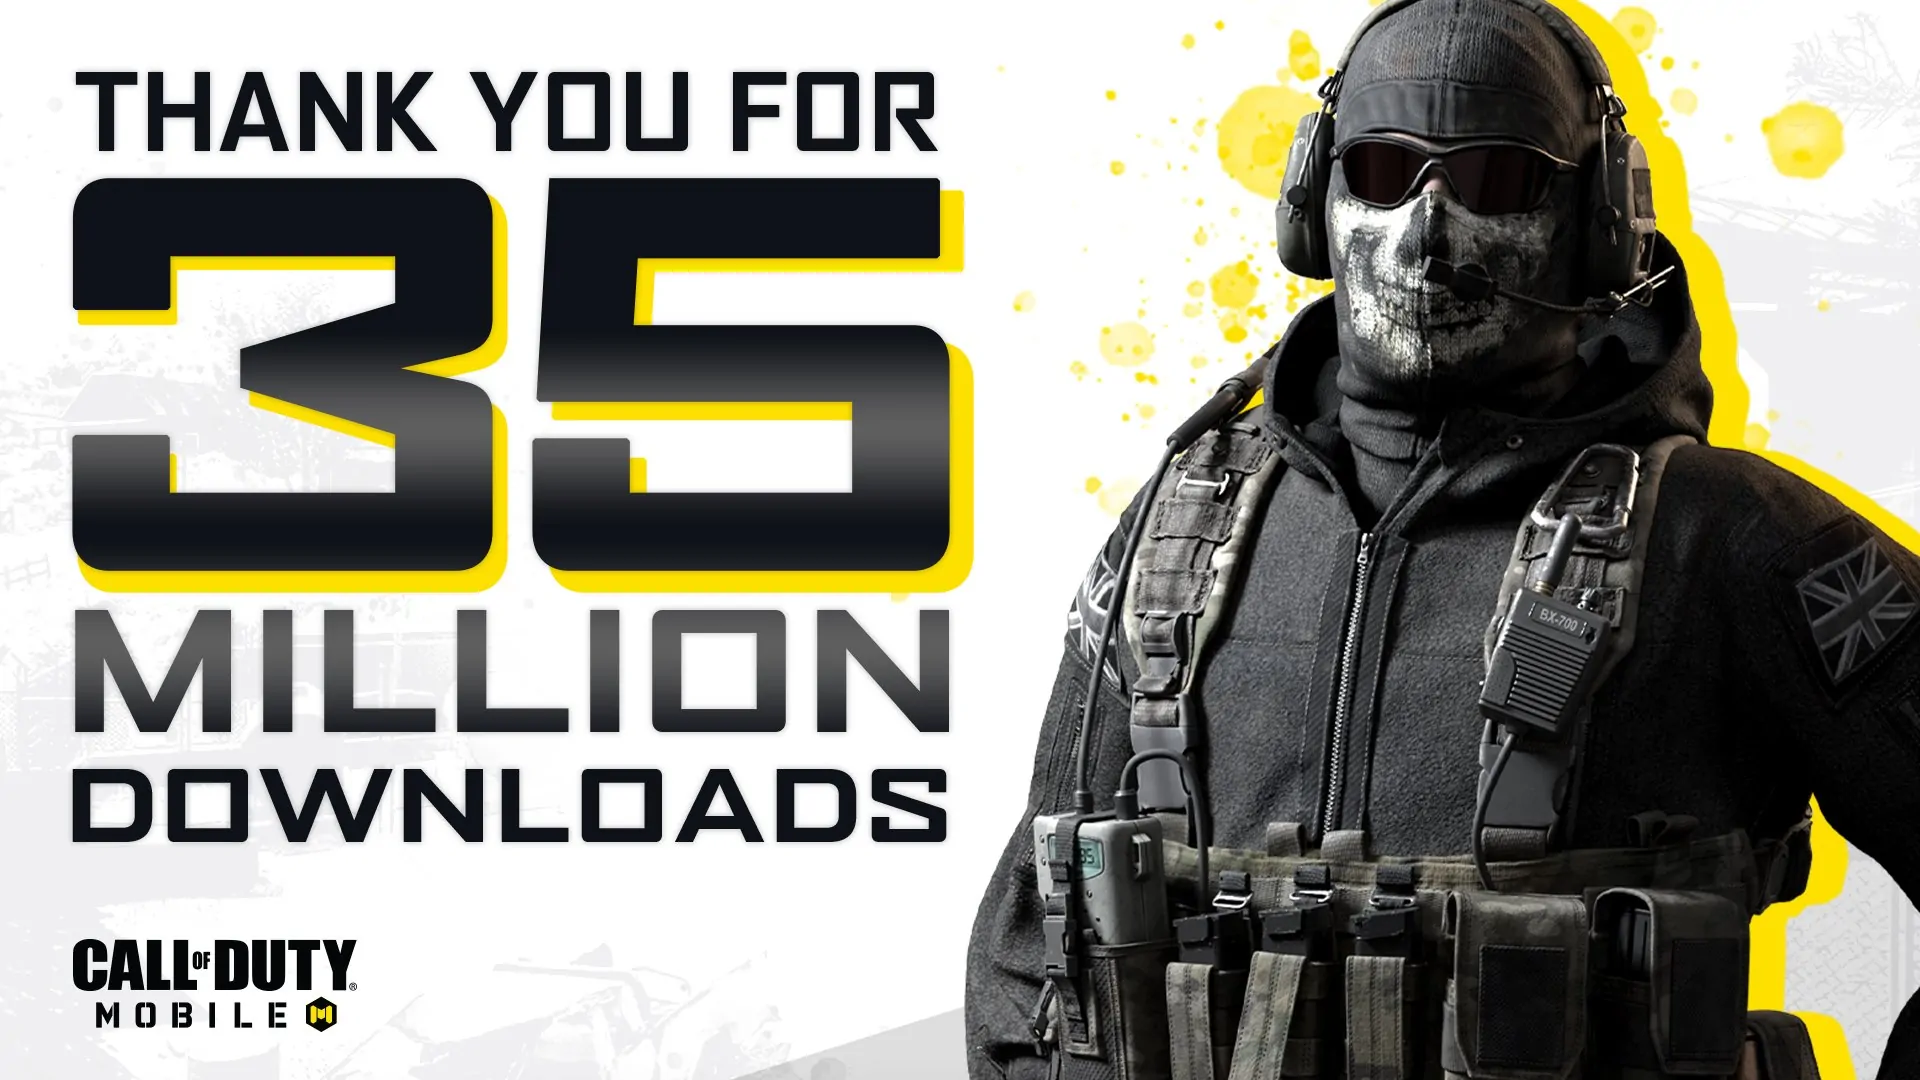 Call of Duty Mobile downloads